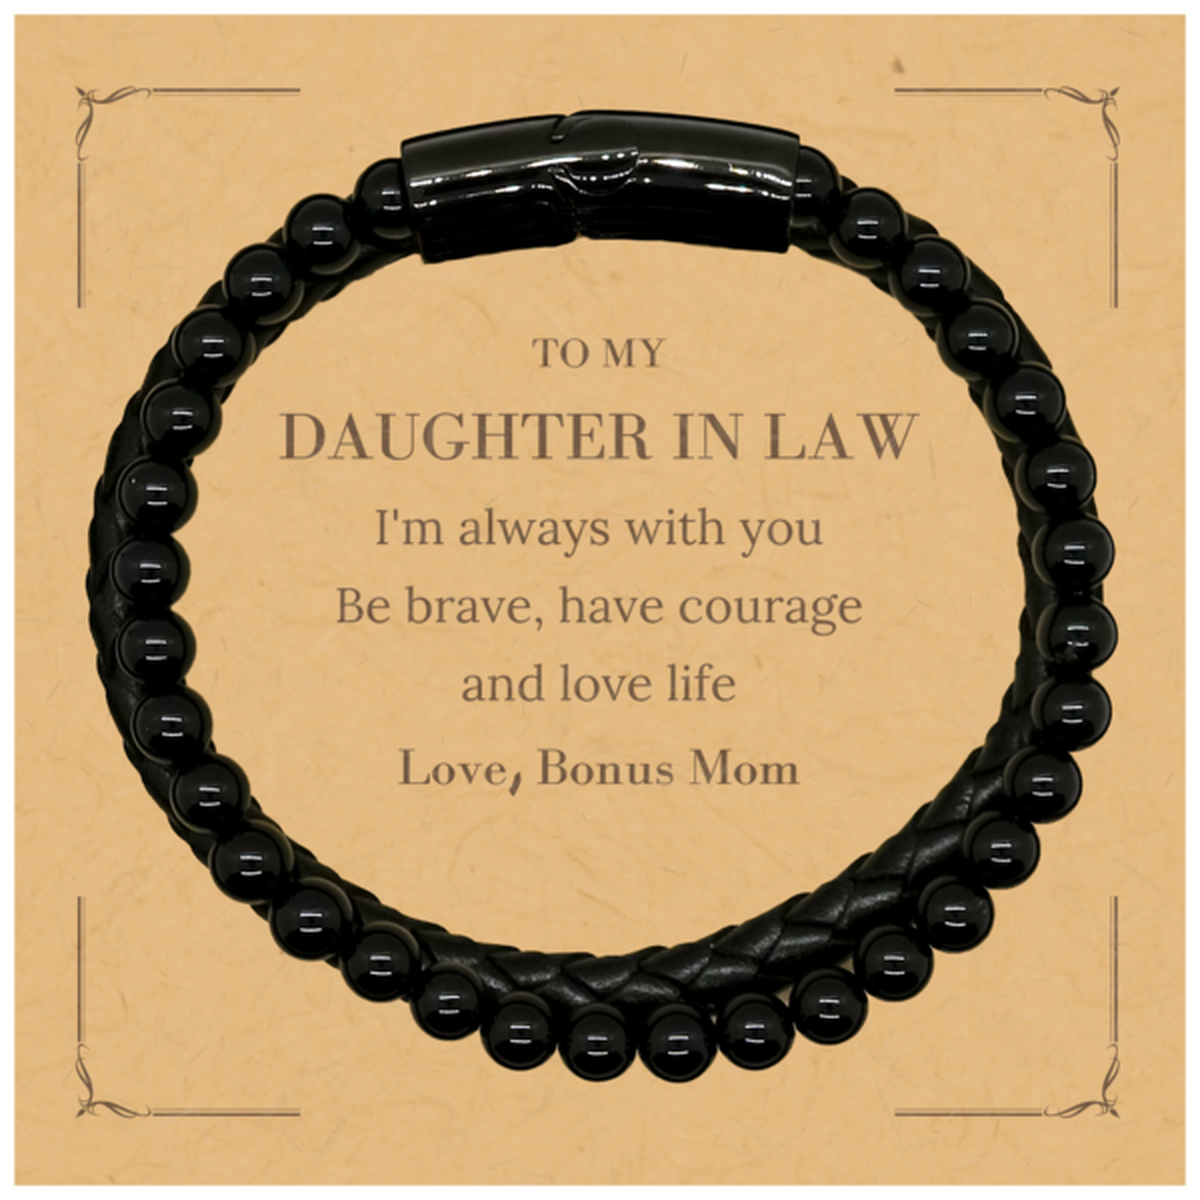 To My Daughter In Law Gifts from Bonus Mom, Unique Stone Leather Bracelets Inspirational Christmas Birthday Graduation Gifts for Daughter In Law I'm always with you. Be brave, have courage and love life. Love, Bonus Mom